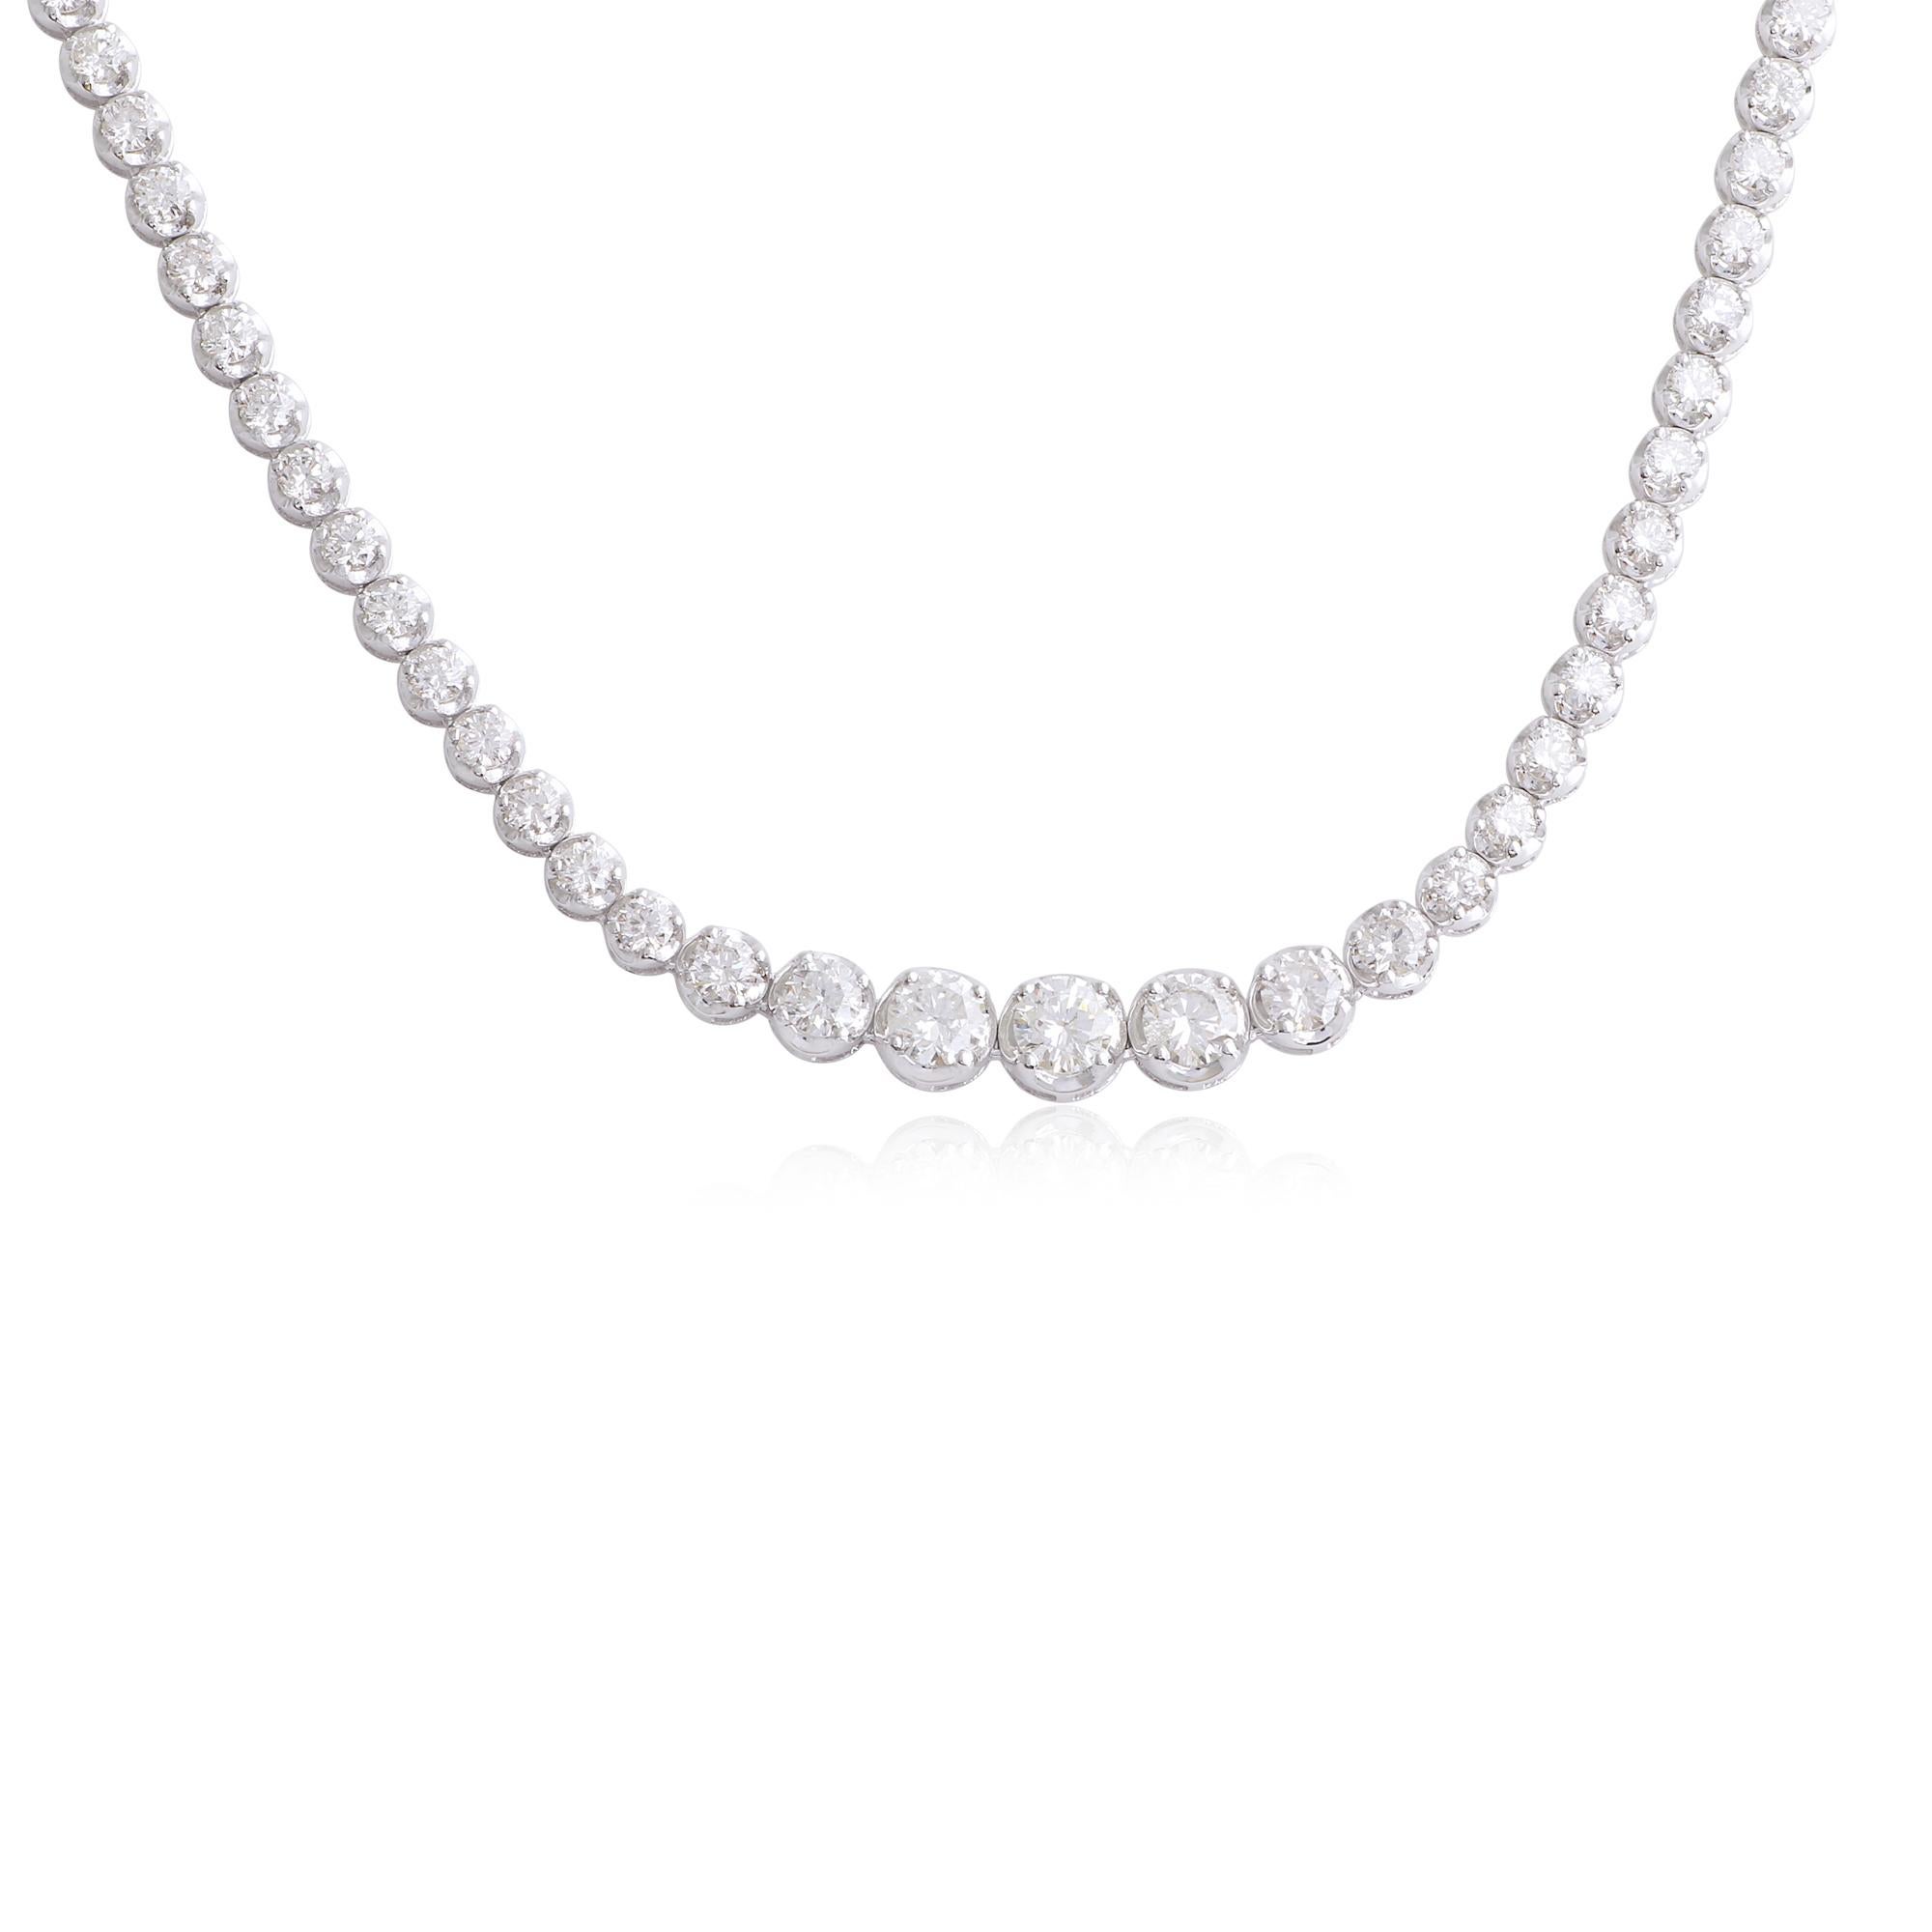 The highlight of this necklace is the exquisite chain adorned with dazzling diamonds. With a total weight of 6.1 carats, the diamonds exhibit SI clarity and HI color classification, ensuring exceptional transparency and a radiant, bright white